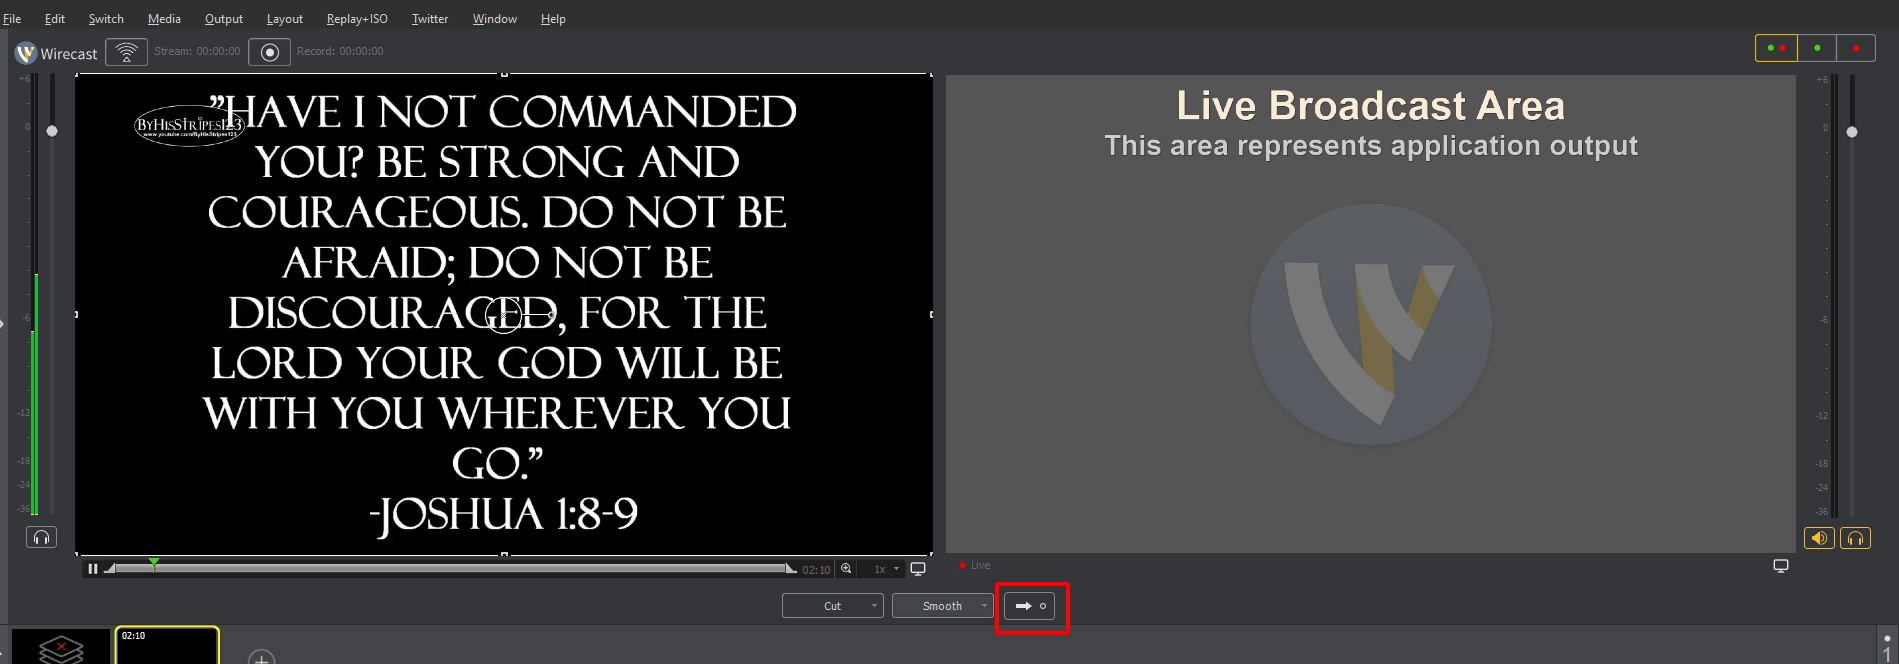 live streaming using wirecast-min